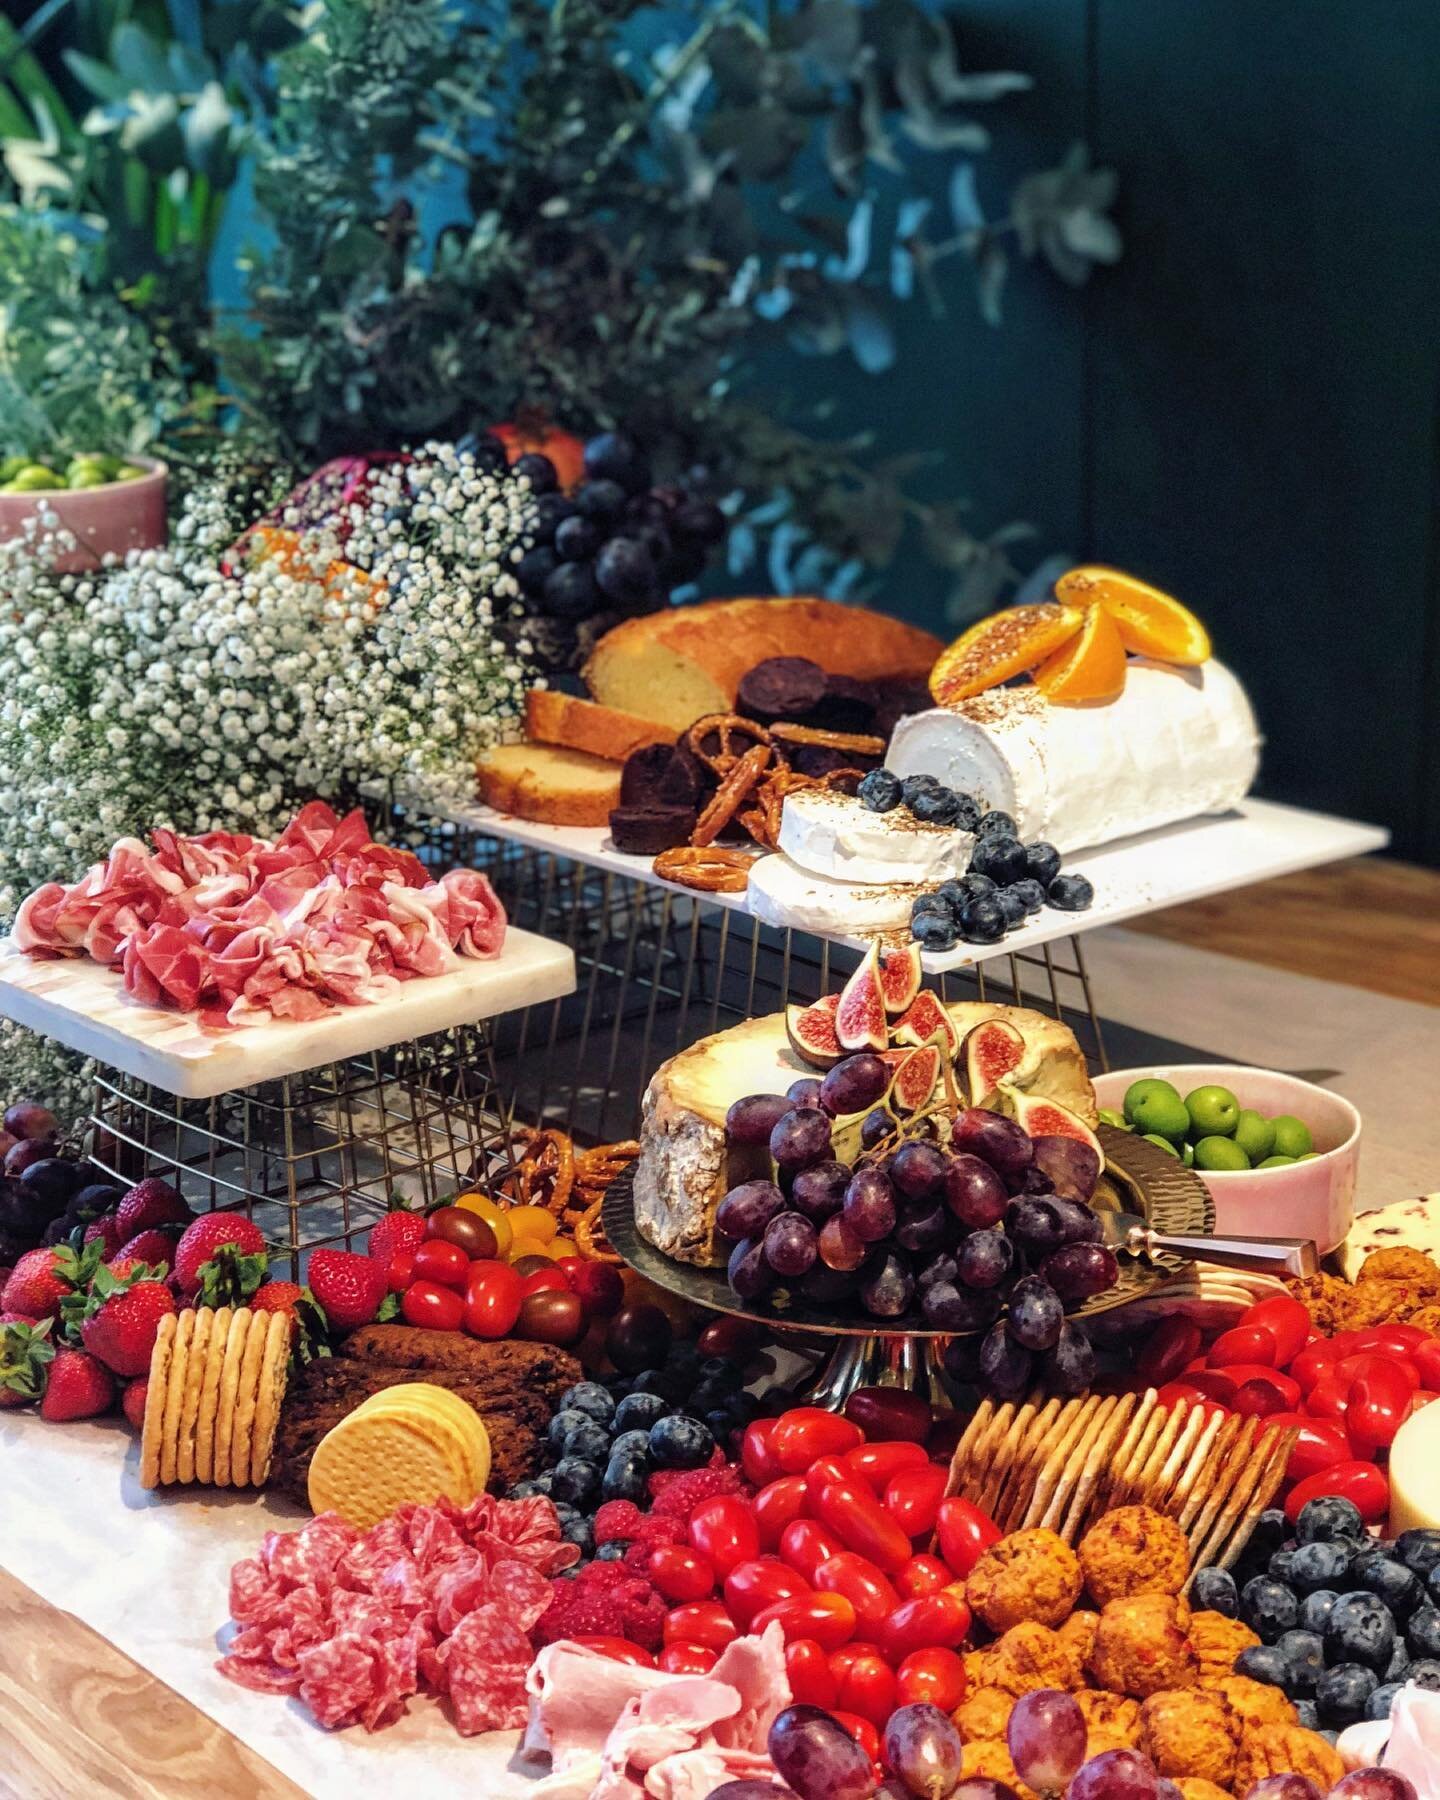 Tis the season for for cheese and wine!
Have you got a last minute party you need to cater for? Our big grazing and feast tables make a show stopping impact. Plus who doesn&rsquo;t love a giant cheese and ham board? 
Pass the port please ❣️
.
Boards 